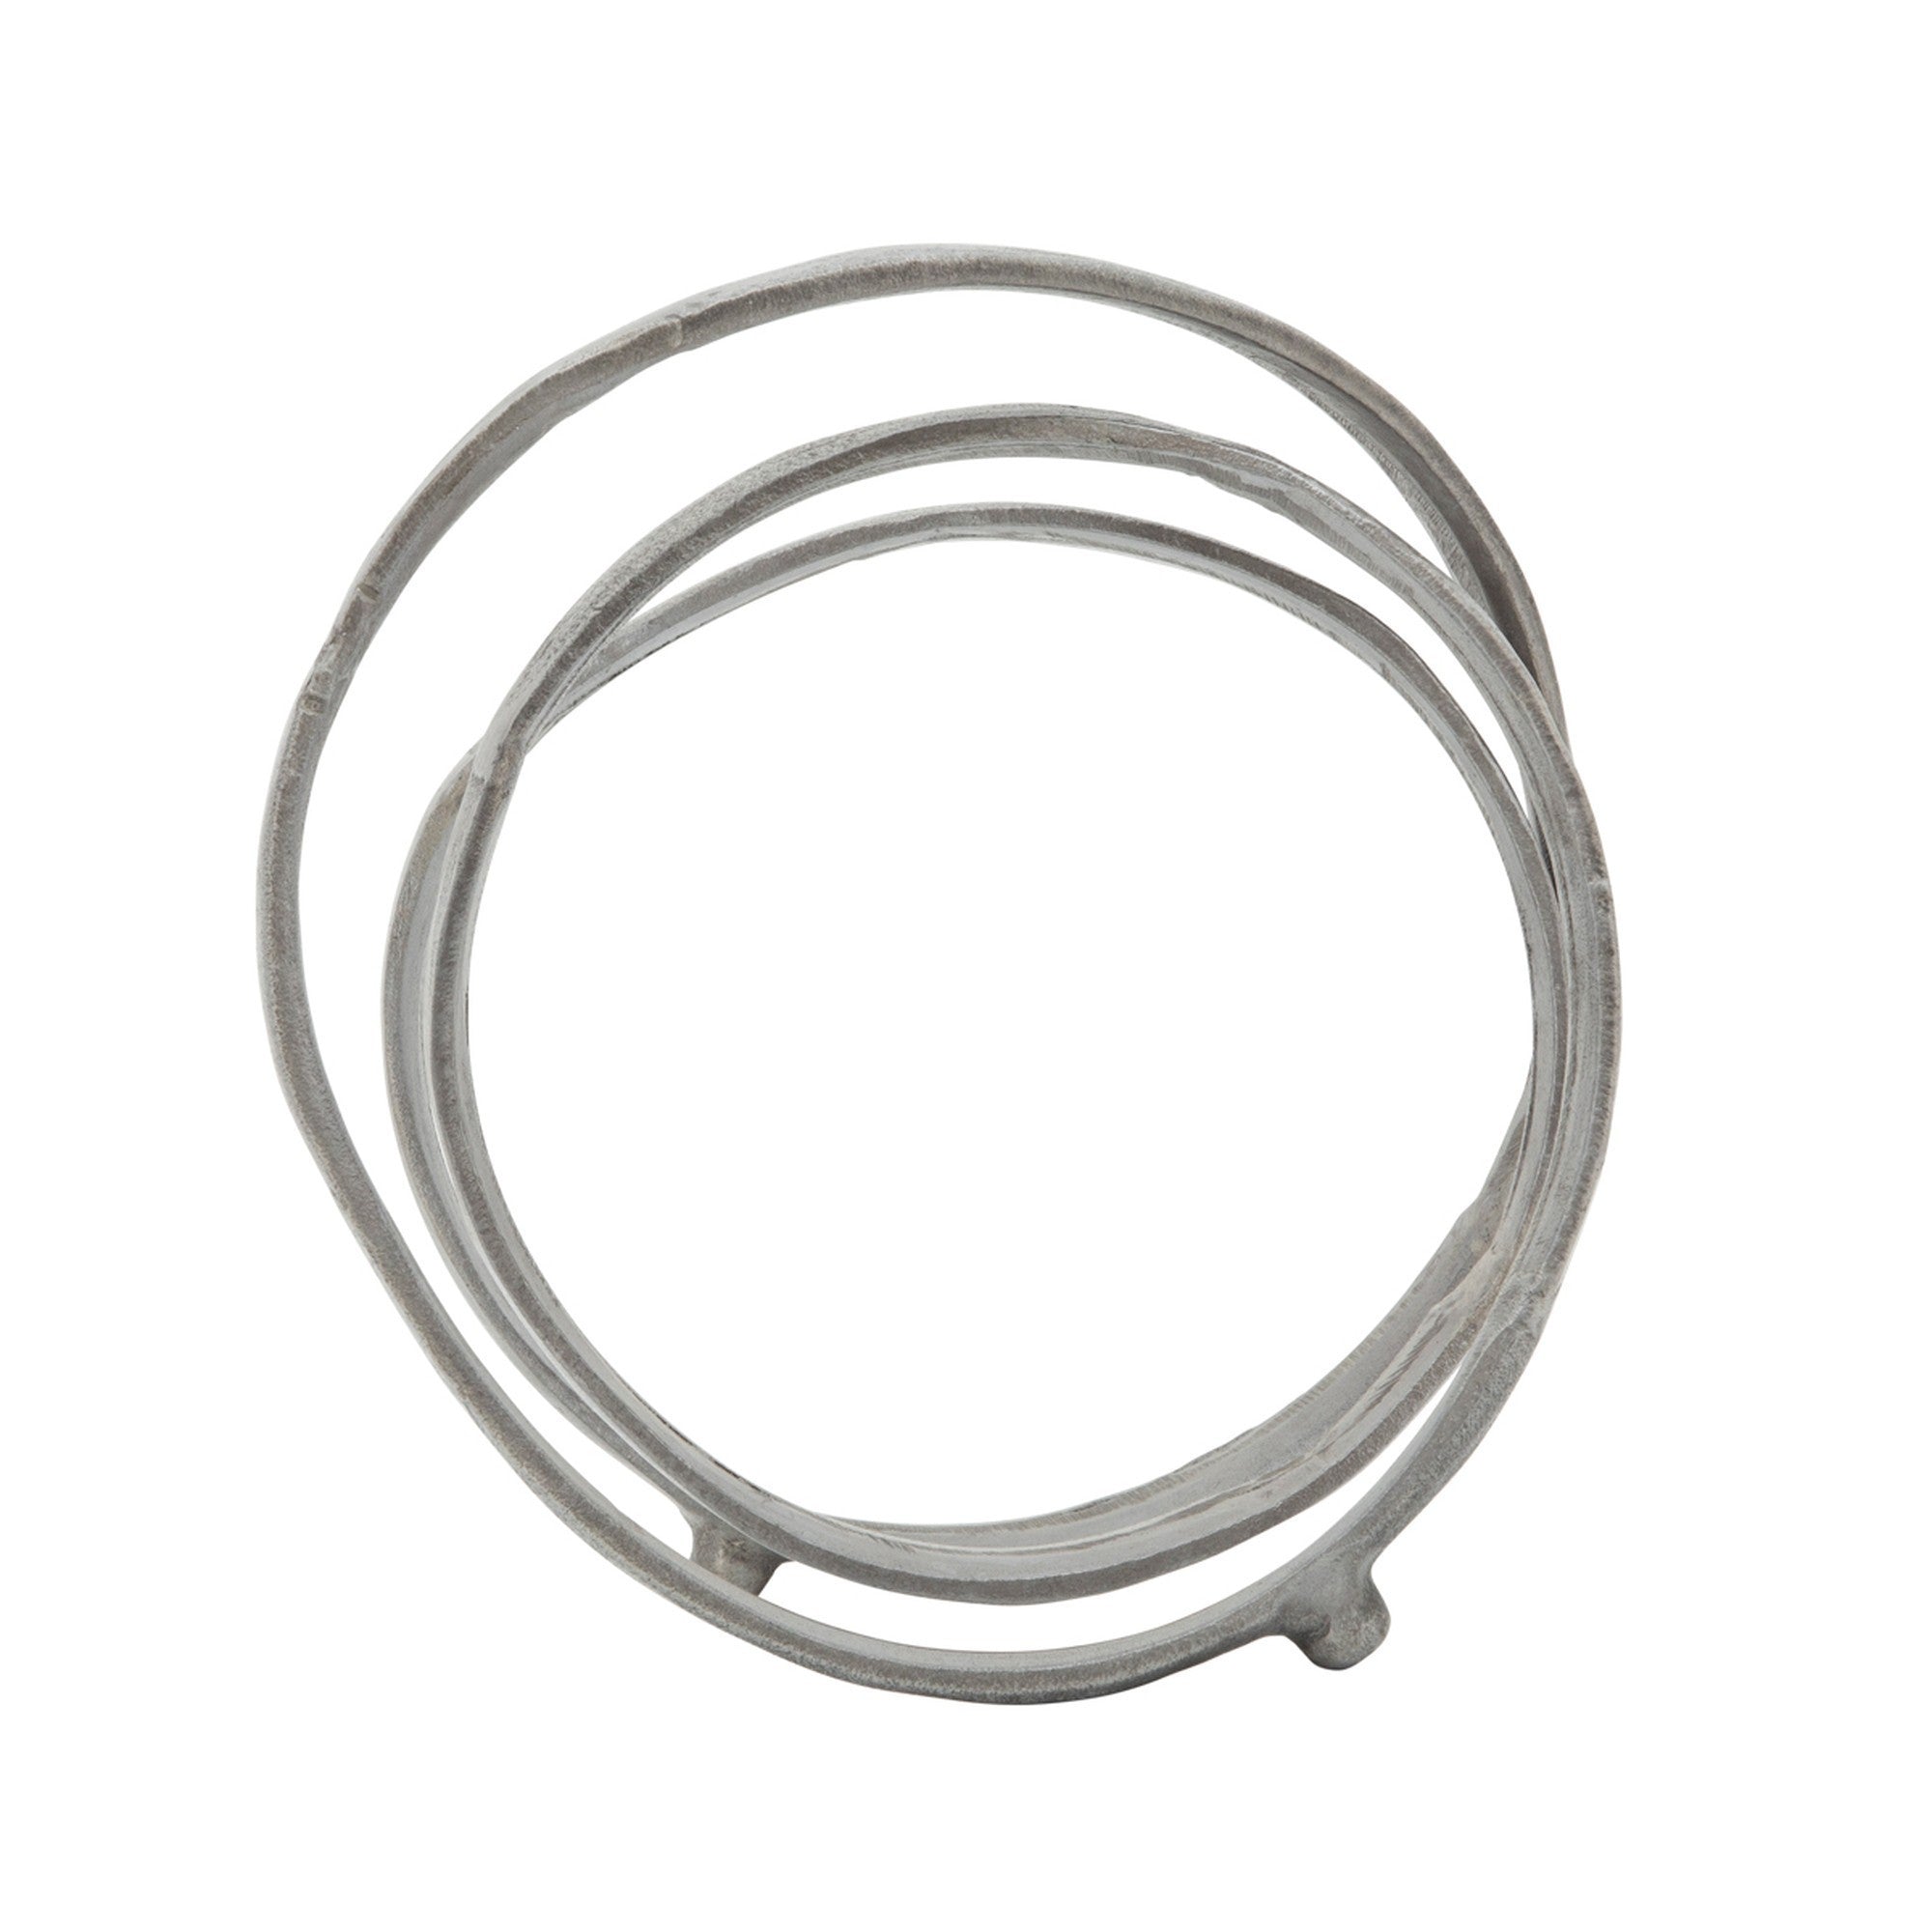 Sculpture with Metal Interconnected Ring Design,